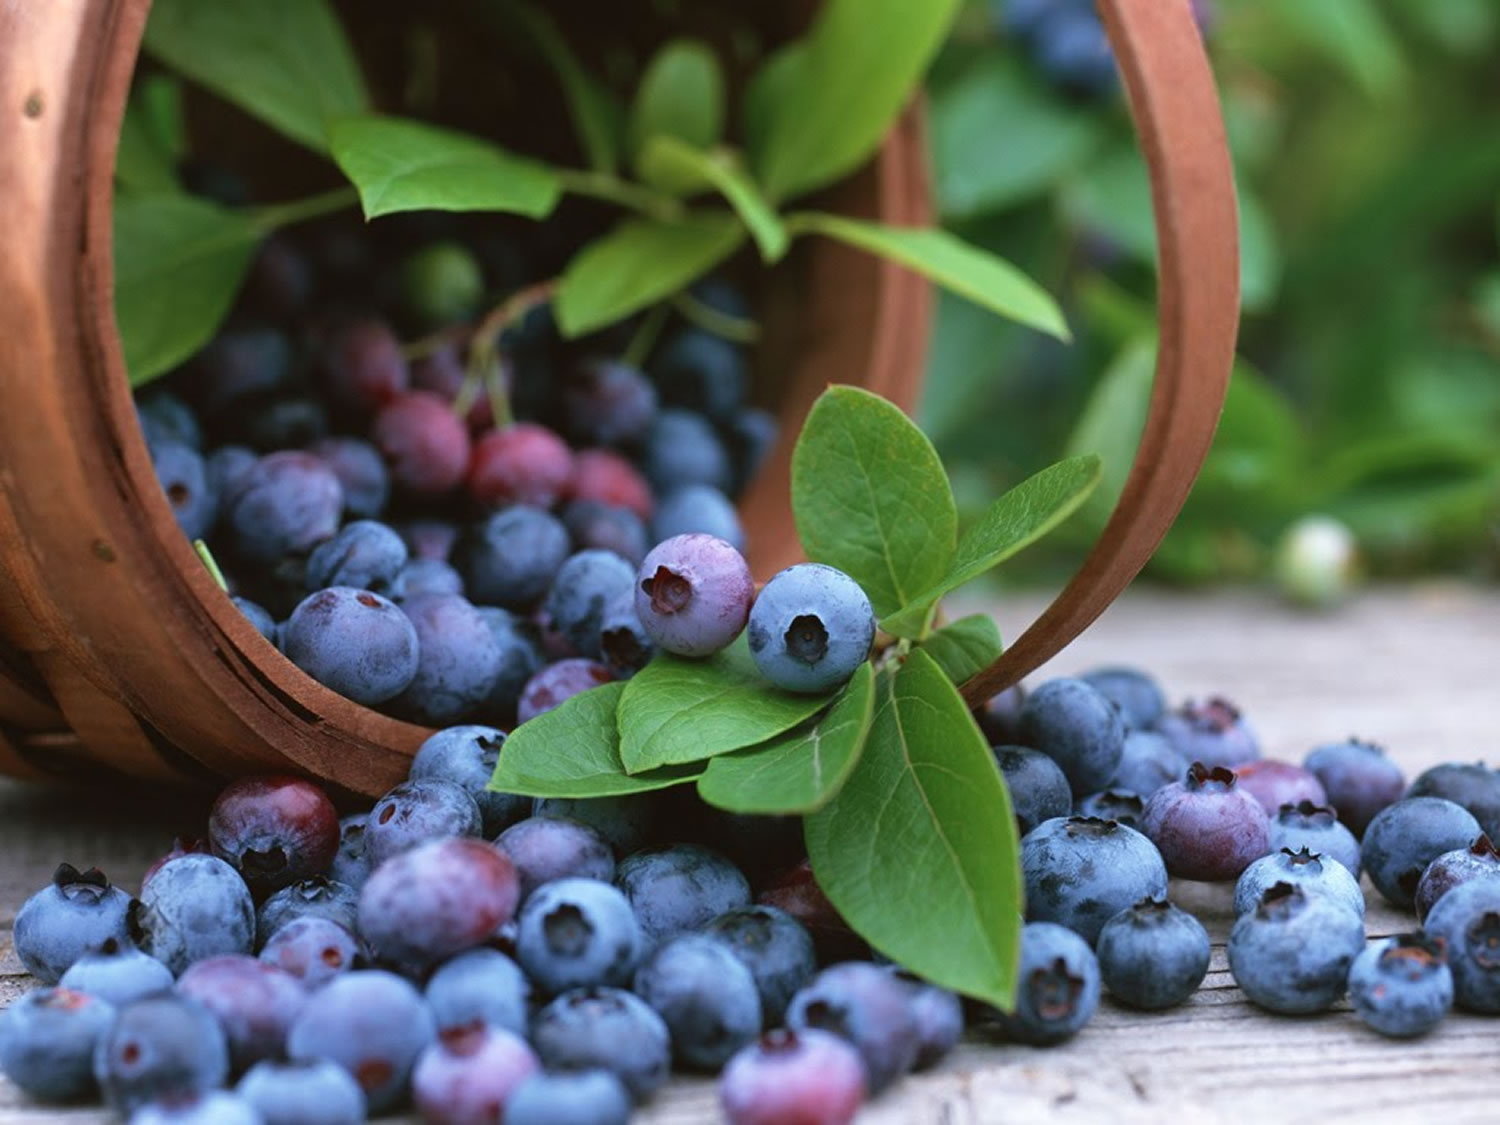 Bilberry, Bilberry Extract - What Are Their Benefits & Side Effects